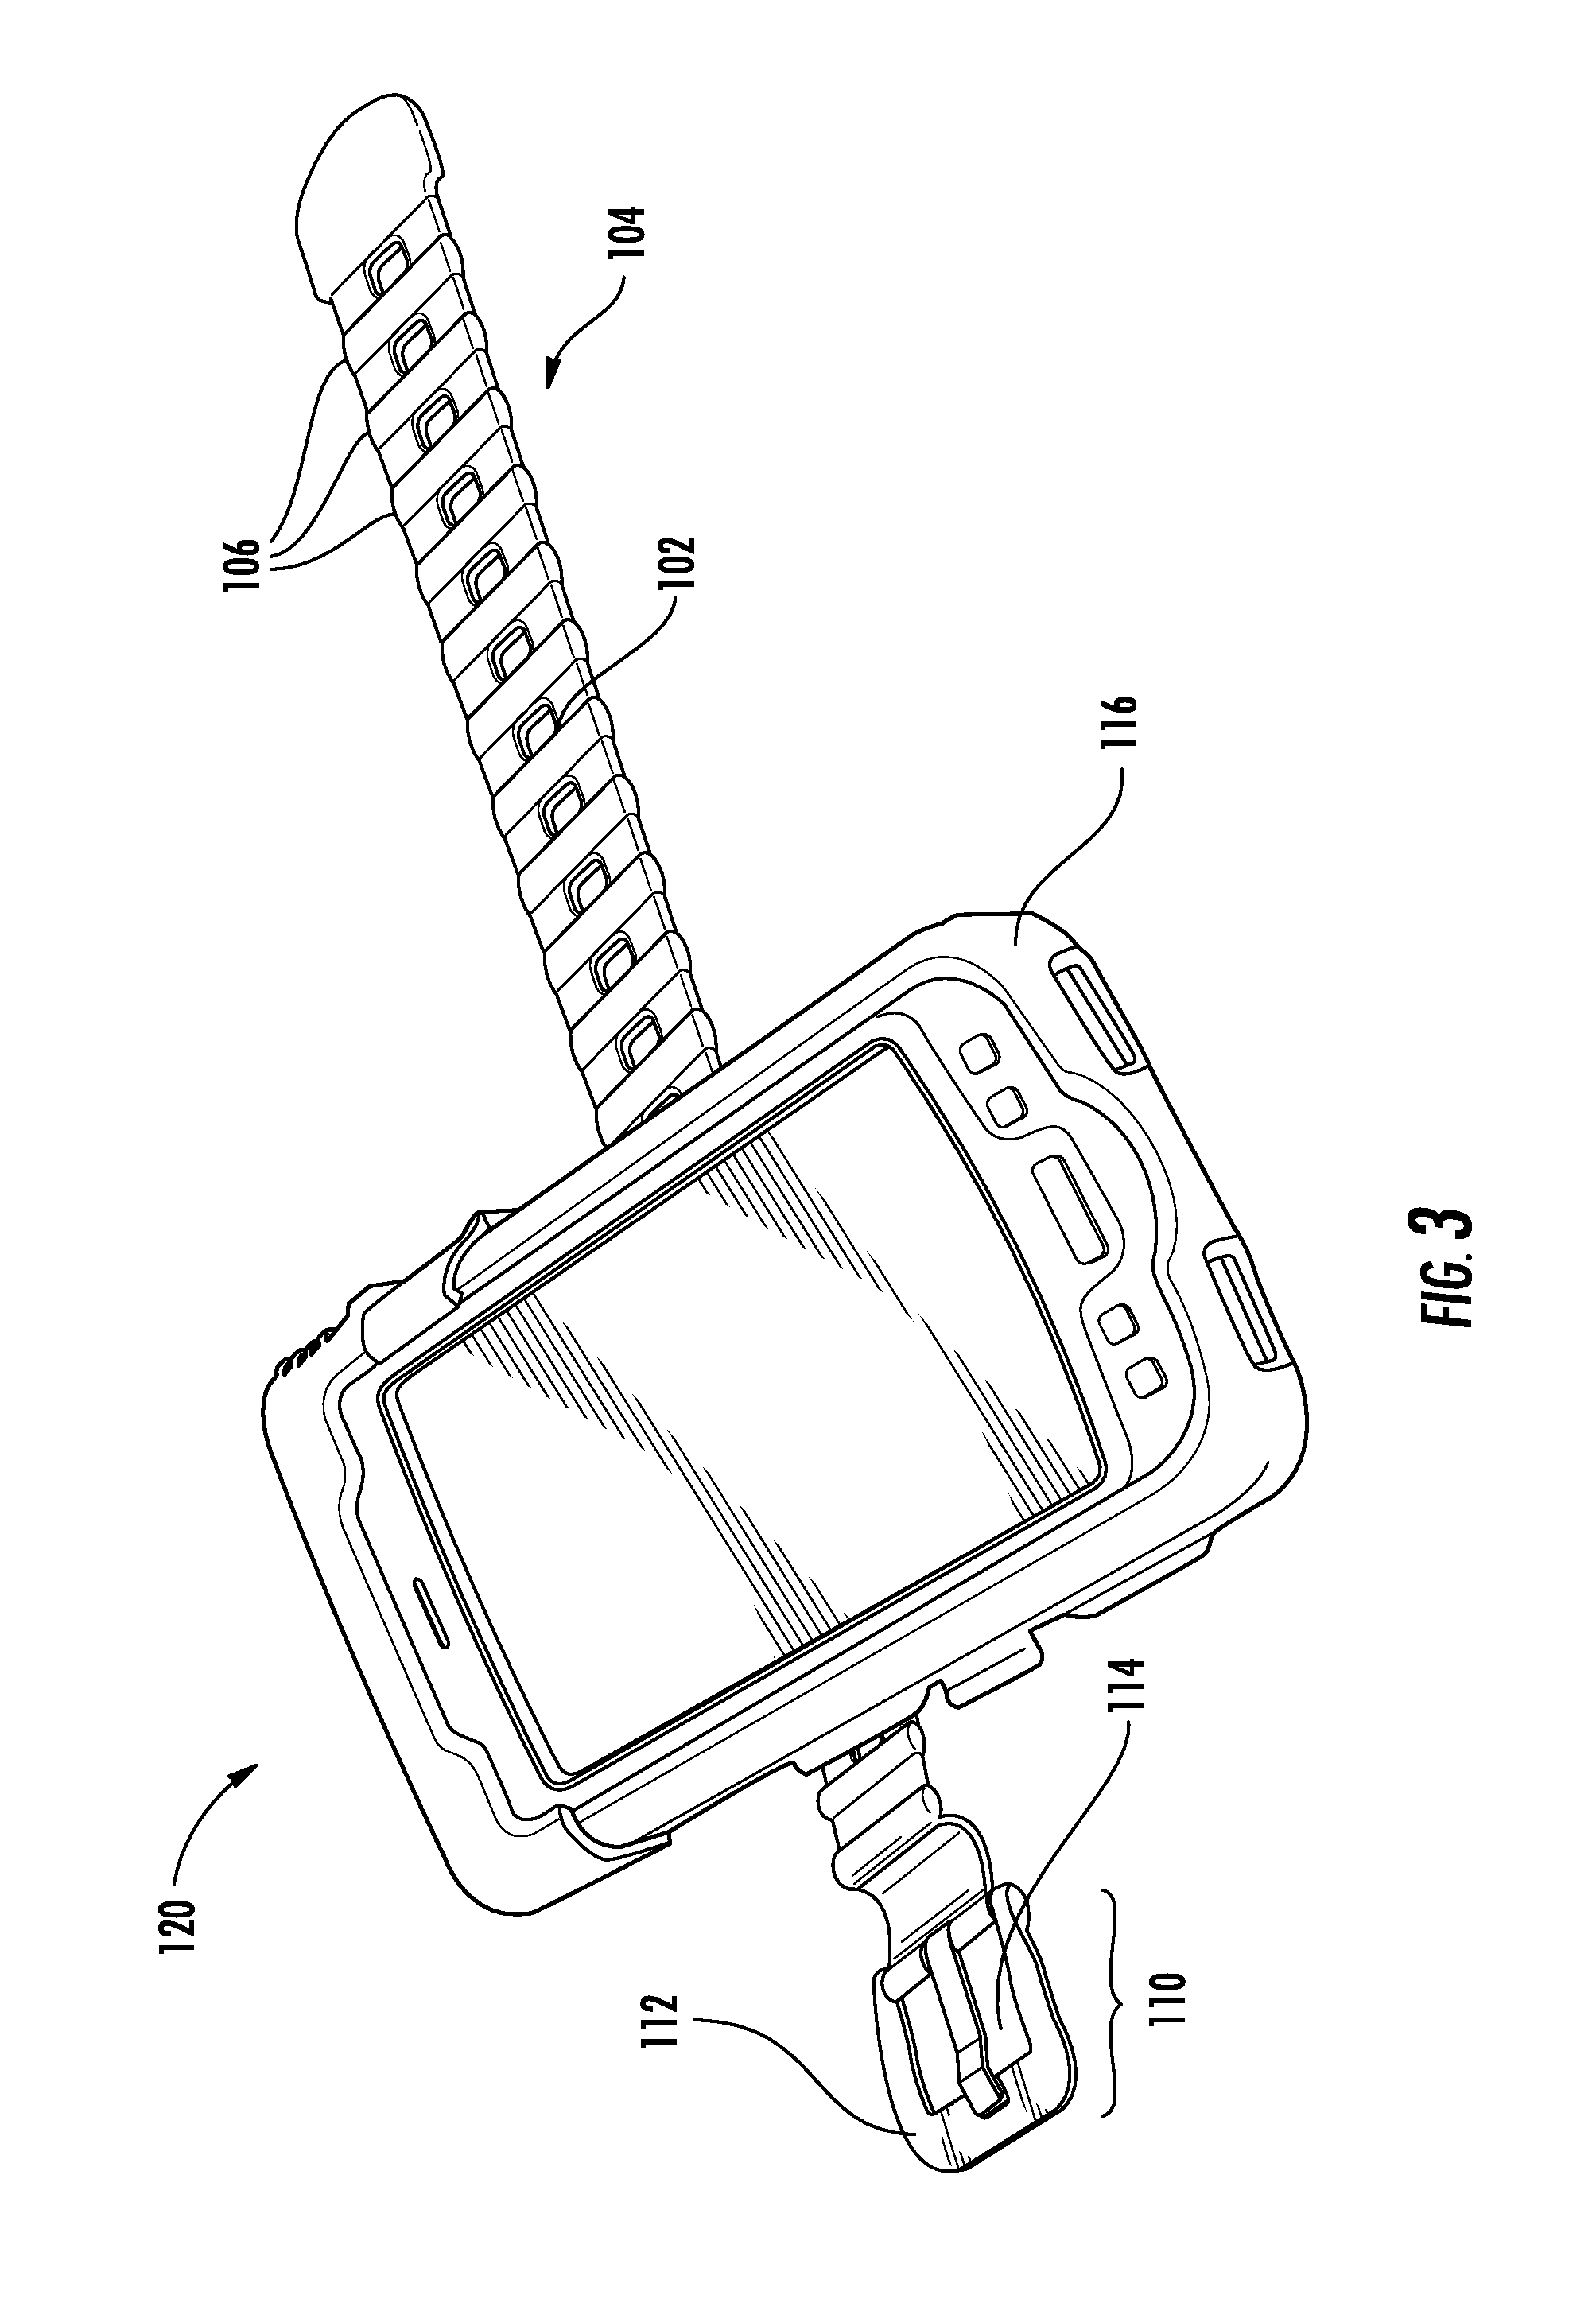 Reclosable strap assembly